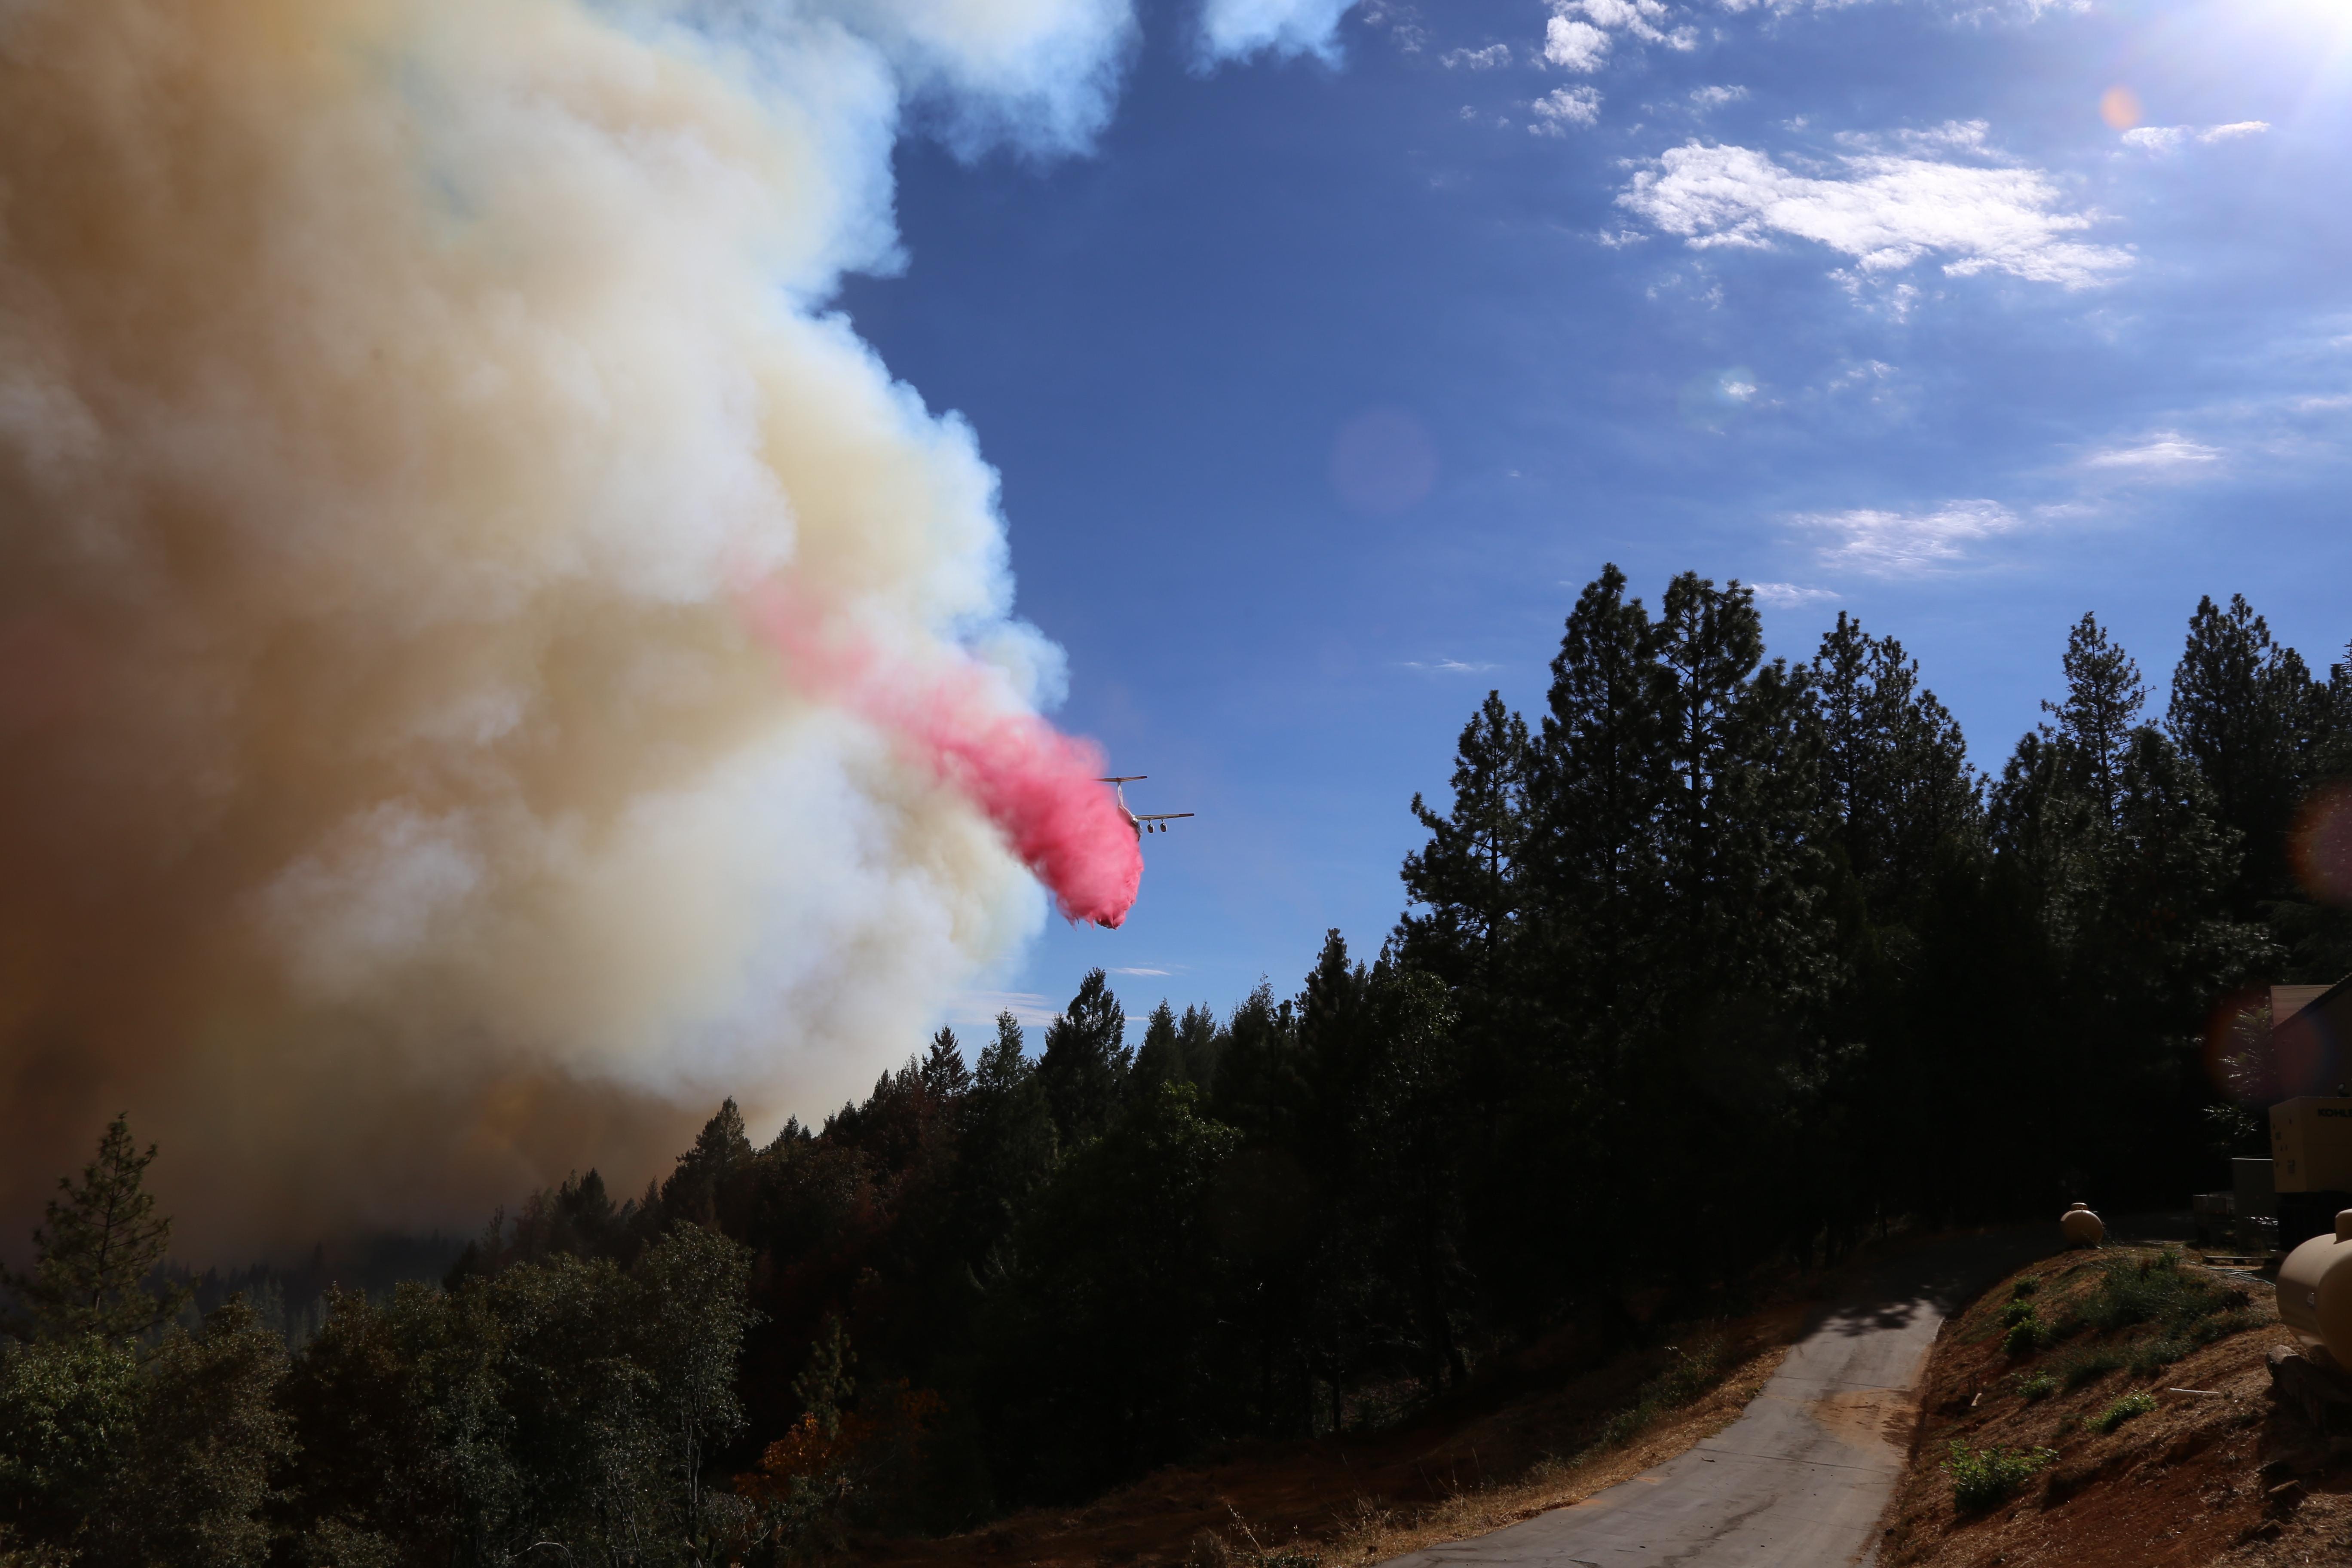 fixed-wing air tanker flying on the edge of thick wildfire smoke, dropping pink retardant on unburned trees